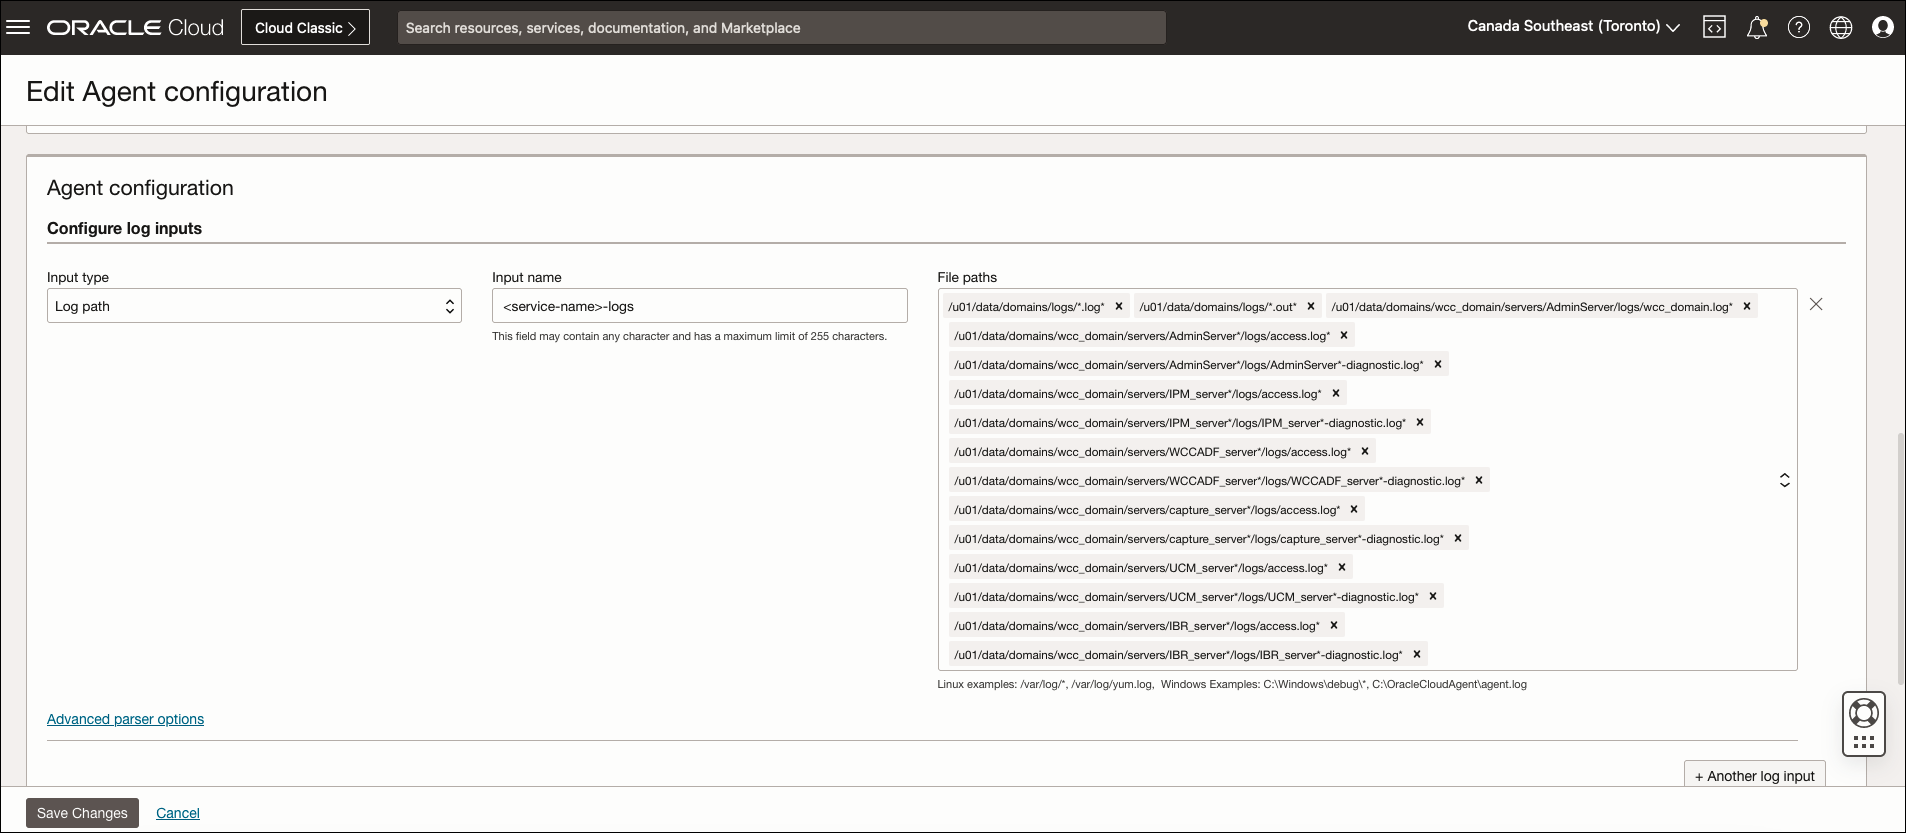 This image shows the Edit Agent configuration page.